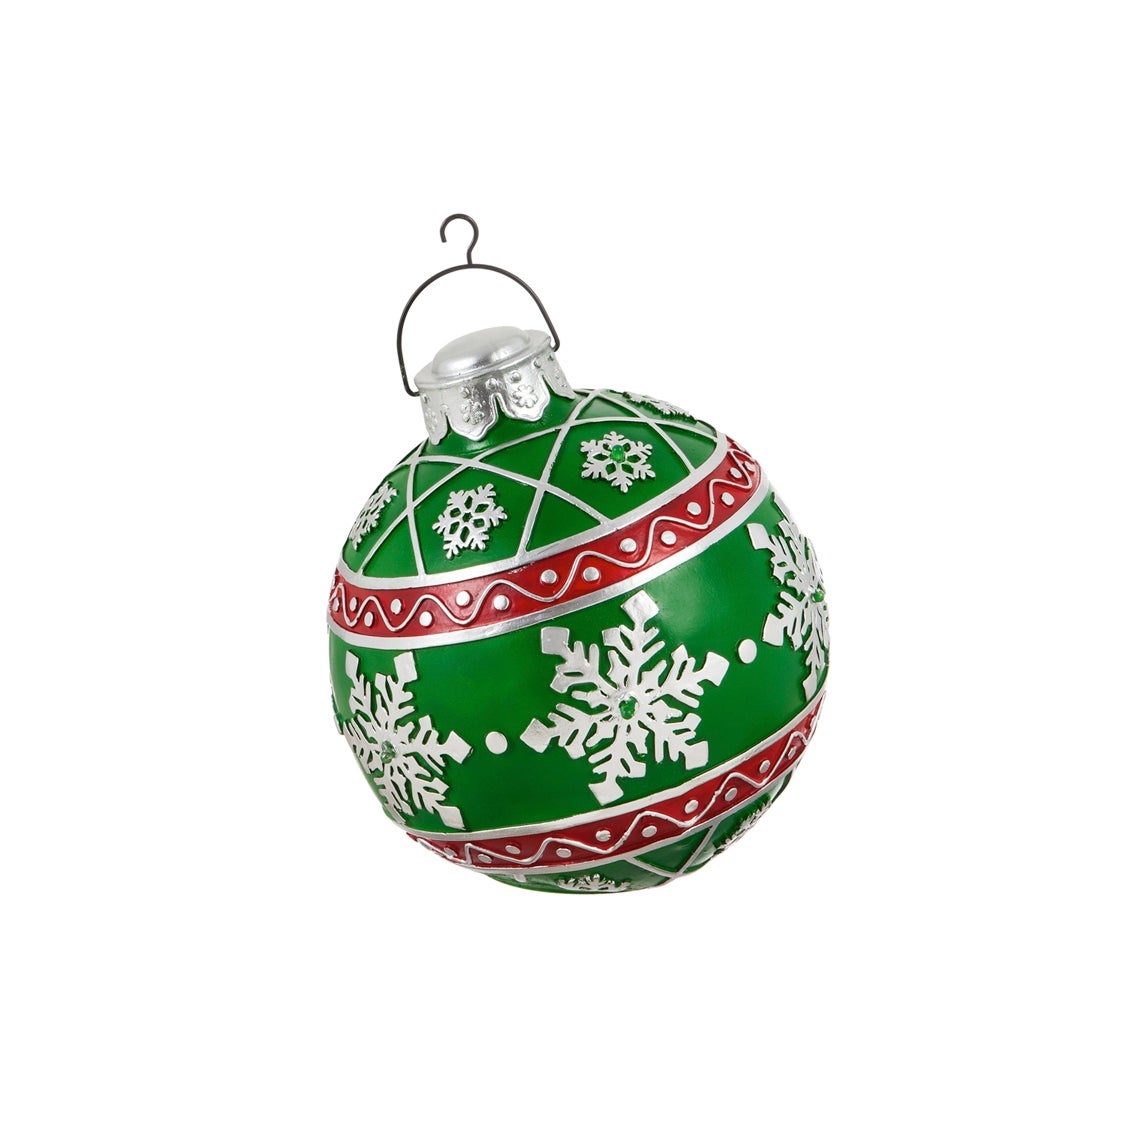 8" Green Battery Operated Outdoor Ornament